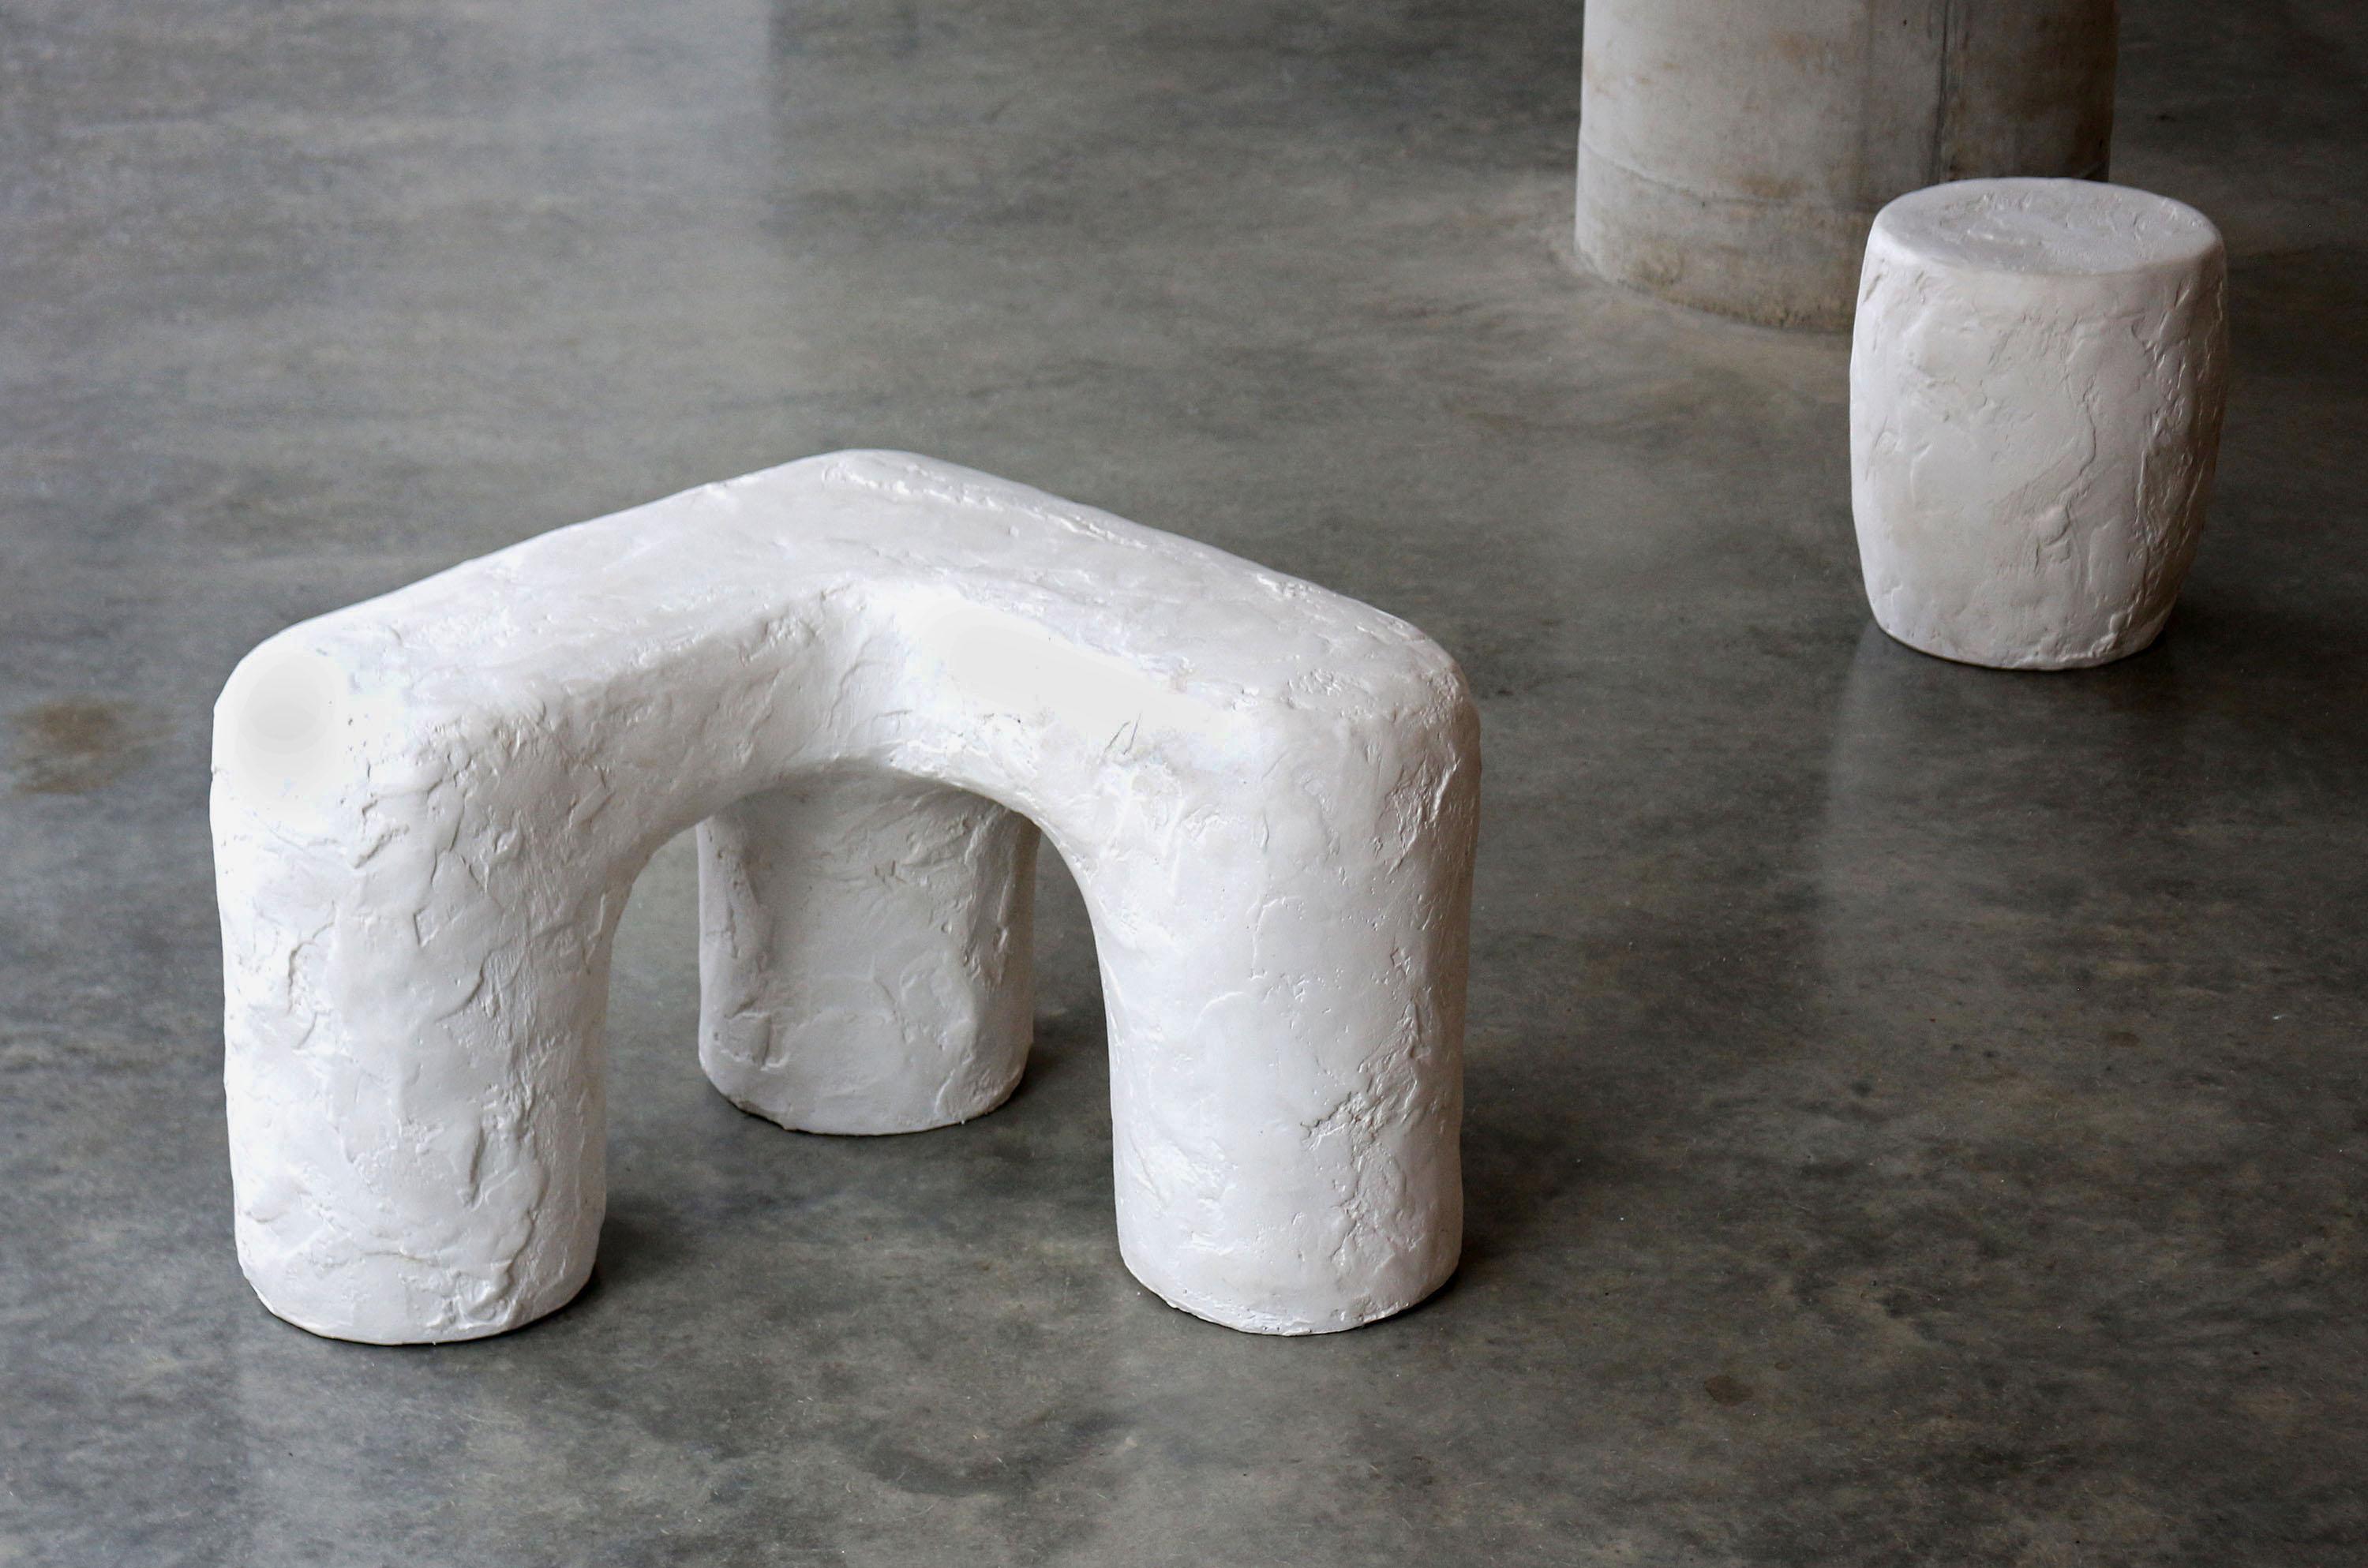 The solid fluid spackle bench is a three-legged bench designed to reflect, imply, or oppose corners. The Solid Fluid Series displays slow and shifting movement that has been frozen and solidified in a moment.

Dimension: 76 cm x 76 cm x 53cm